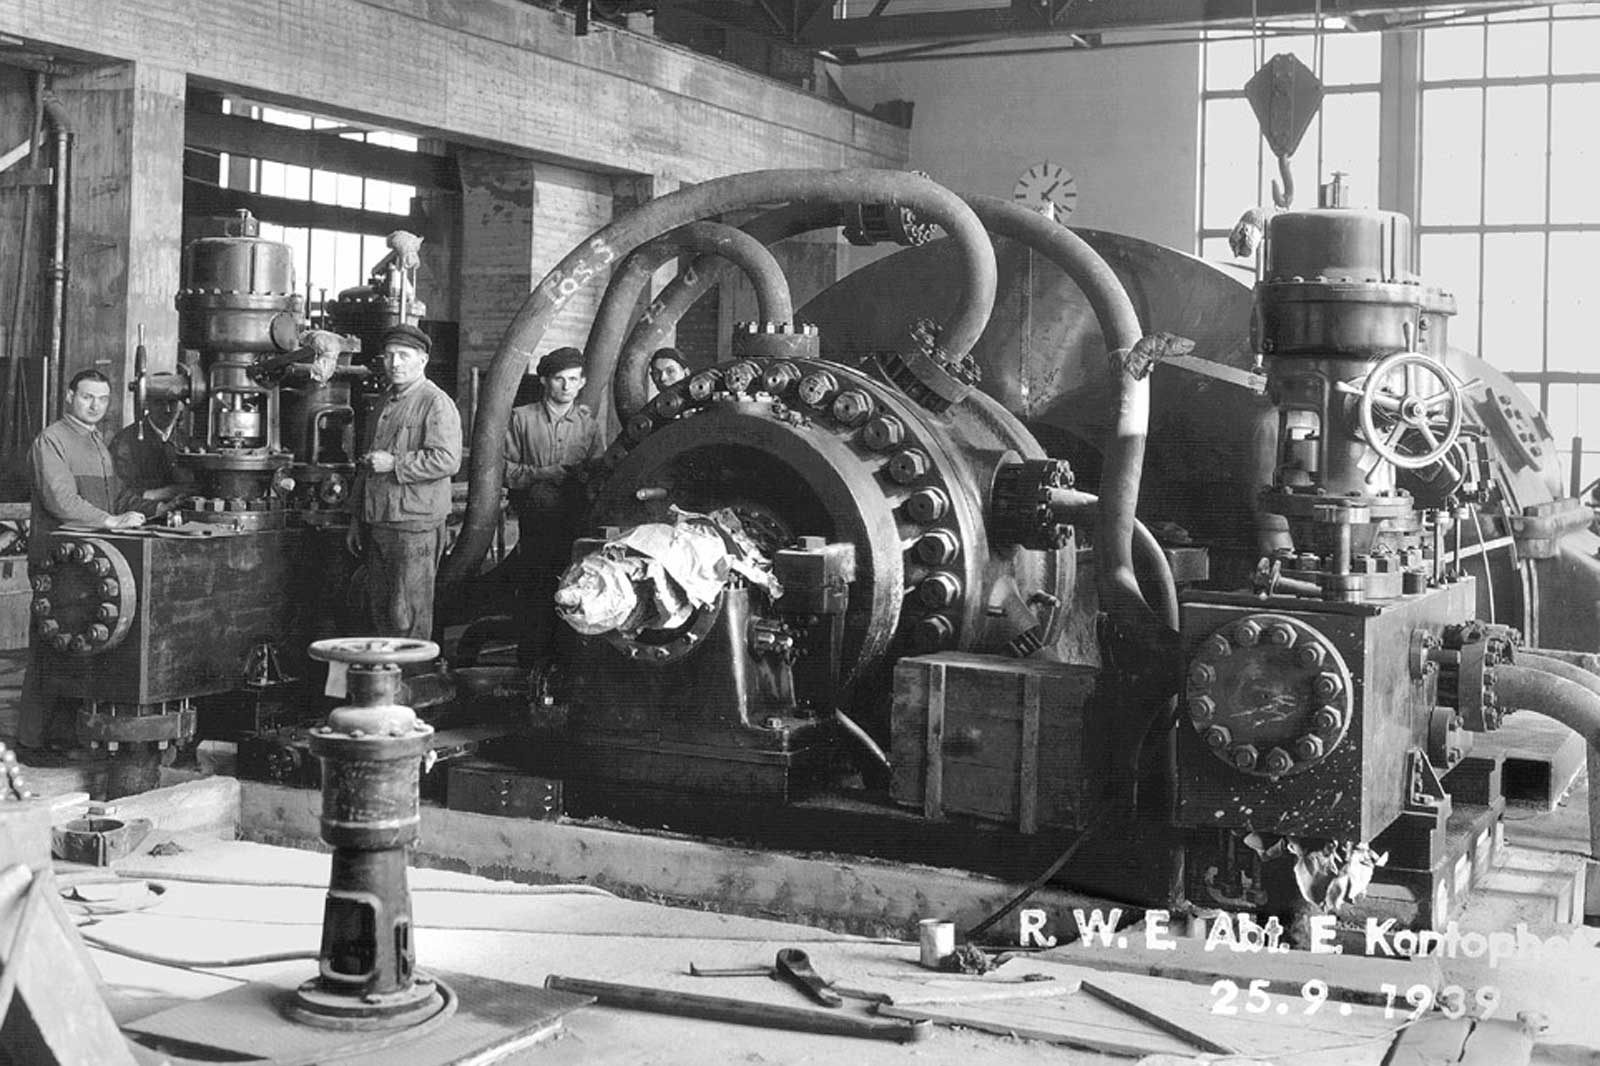 Assembling a steam turbine in the new Karnap power plant, 1939